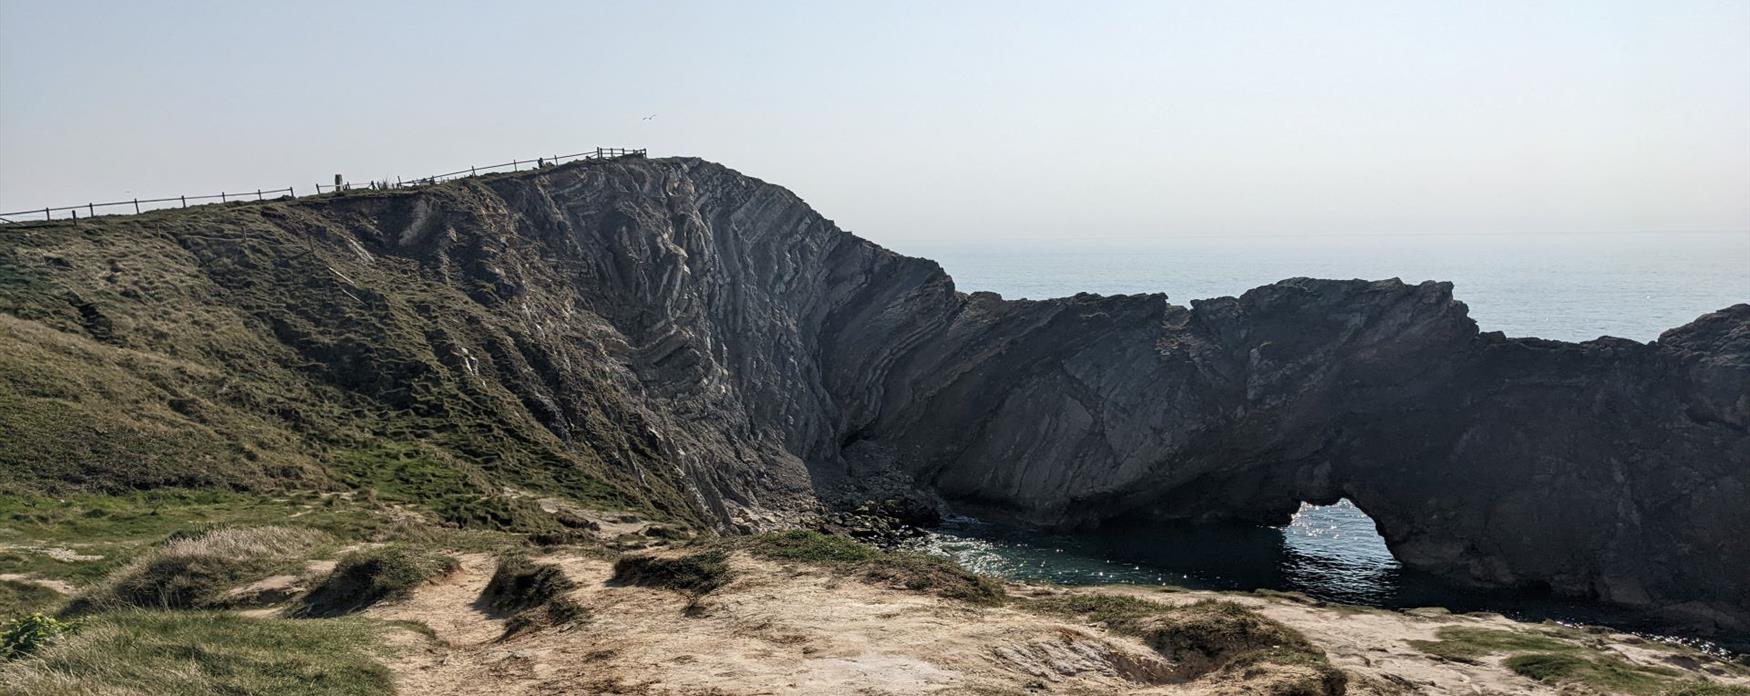 A view of the Lulworth Crumple and Stair Hole from the land side. The rocks in the Lulworth Crumple have been folded up in a 'v' shape under considerable force.